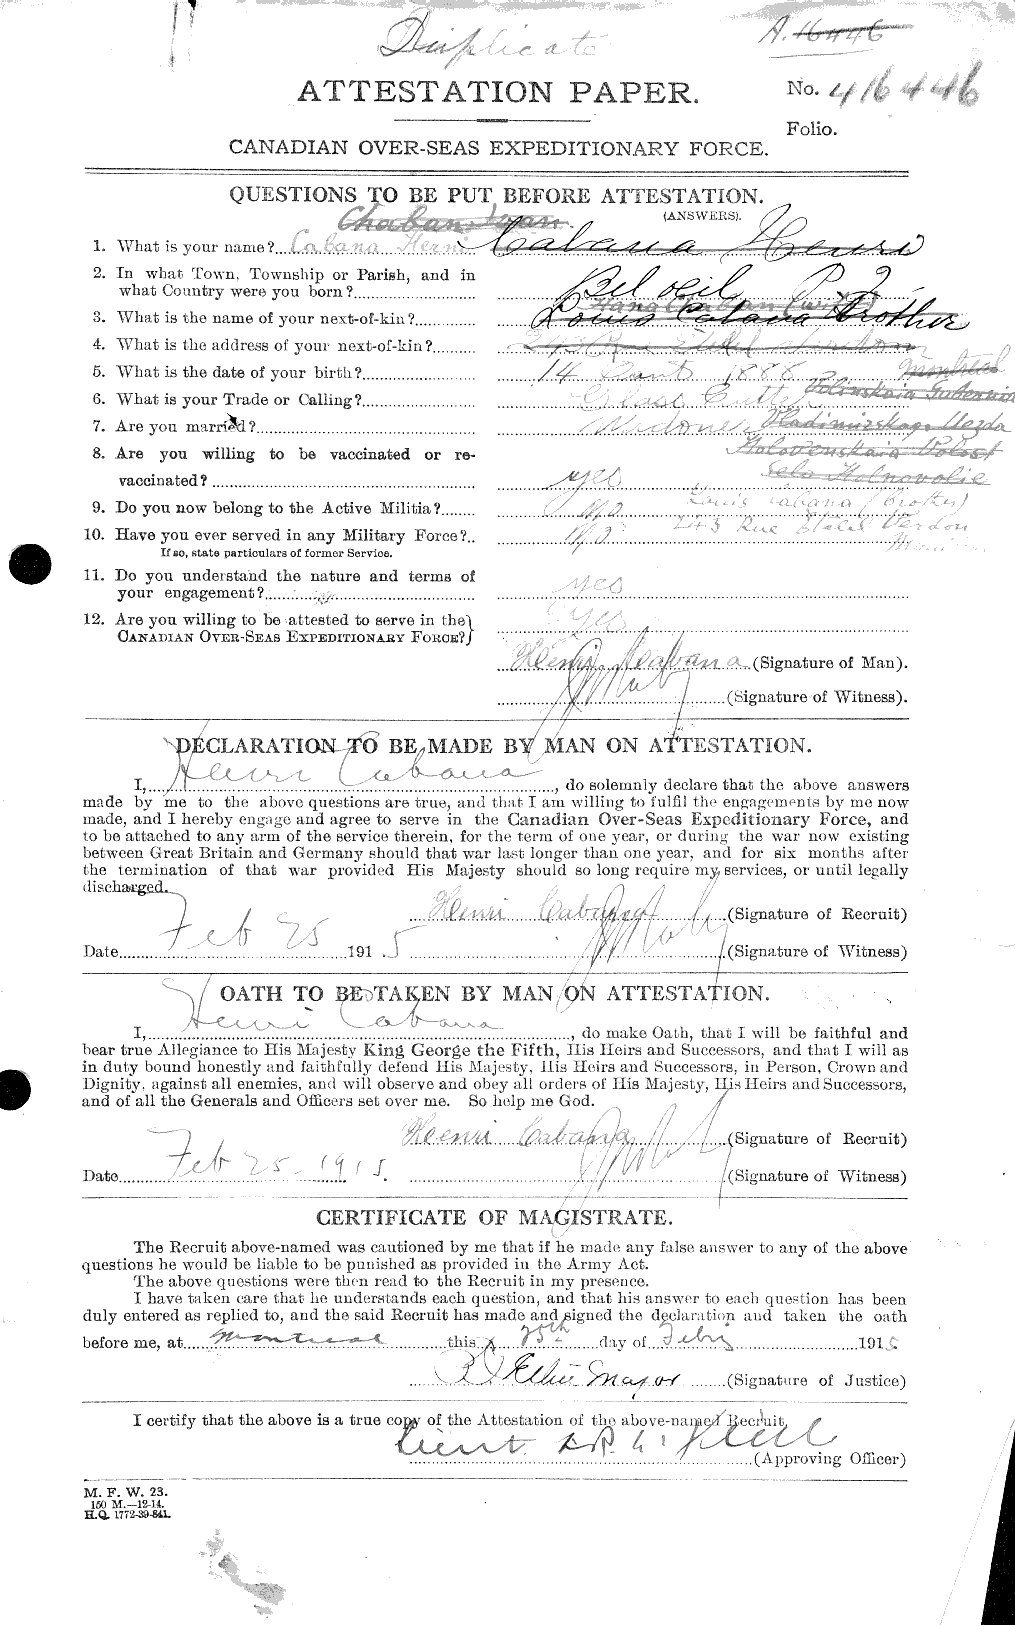 Personnel Records of the First World War - CEF 001440a